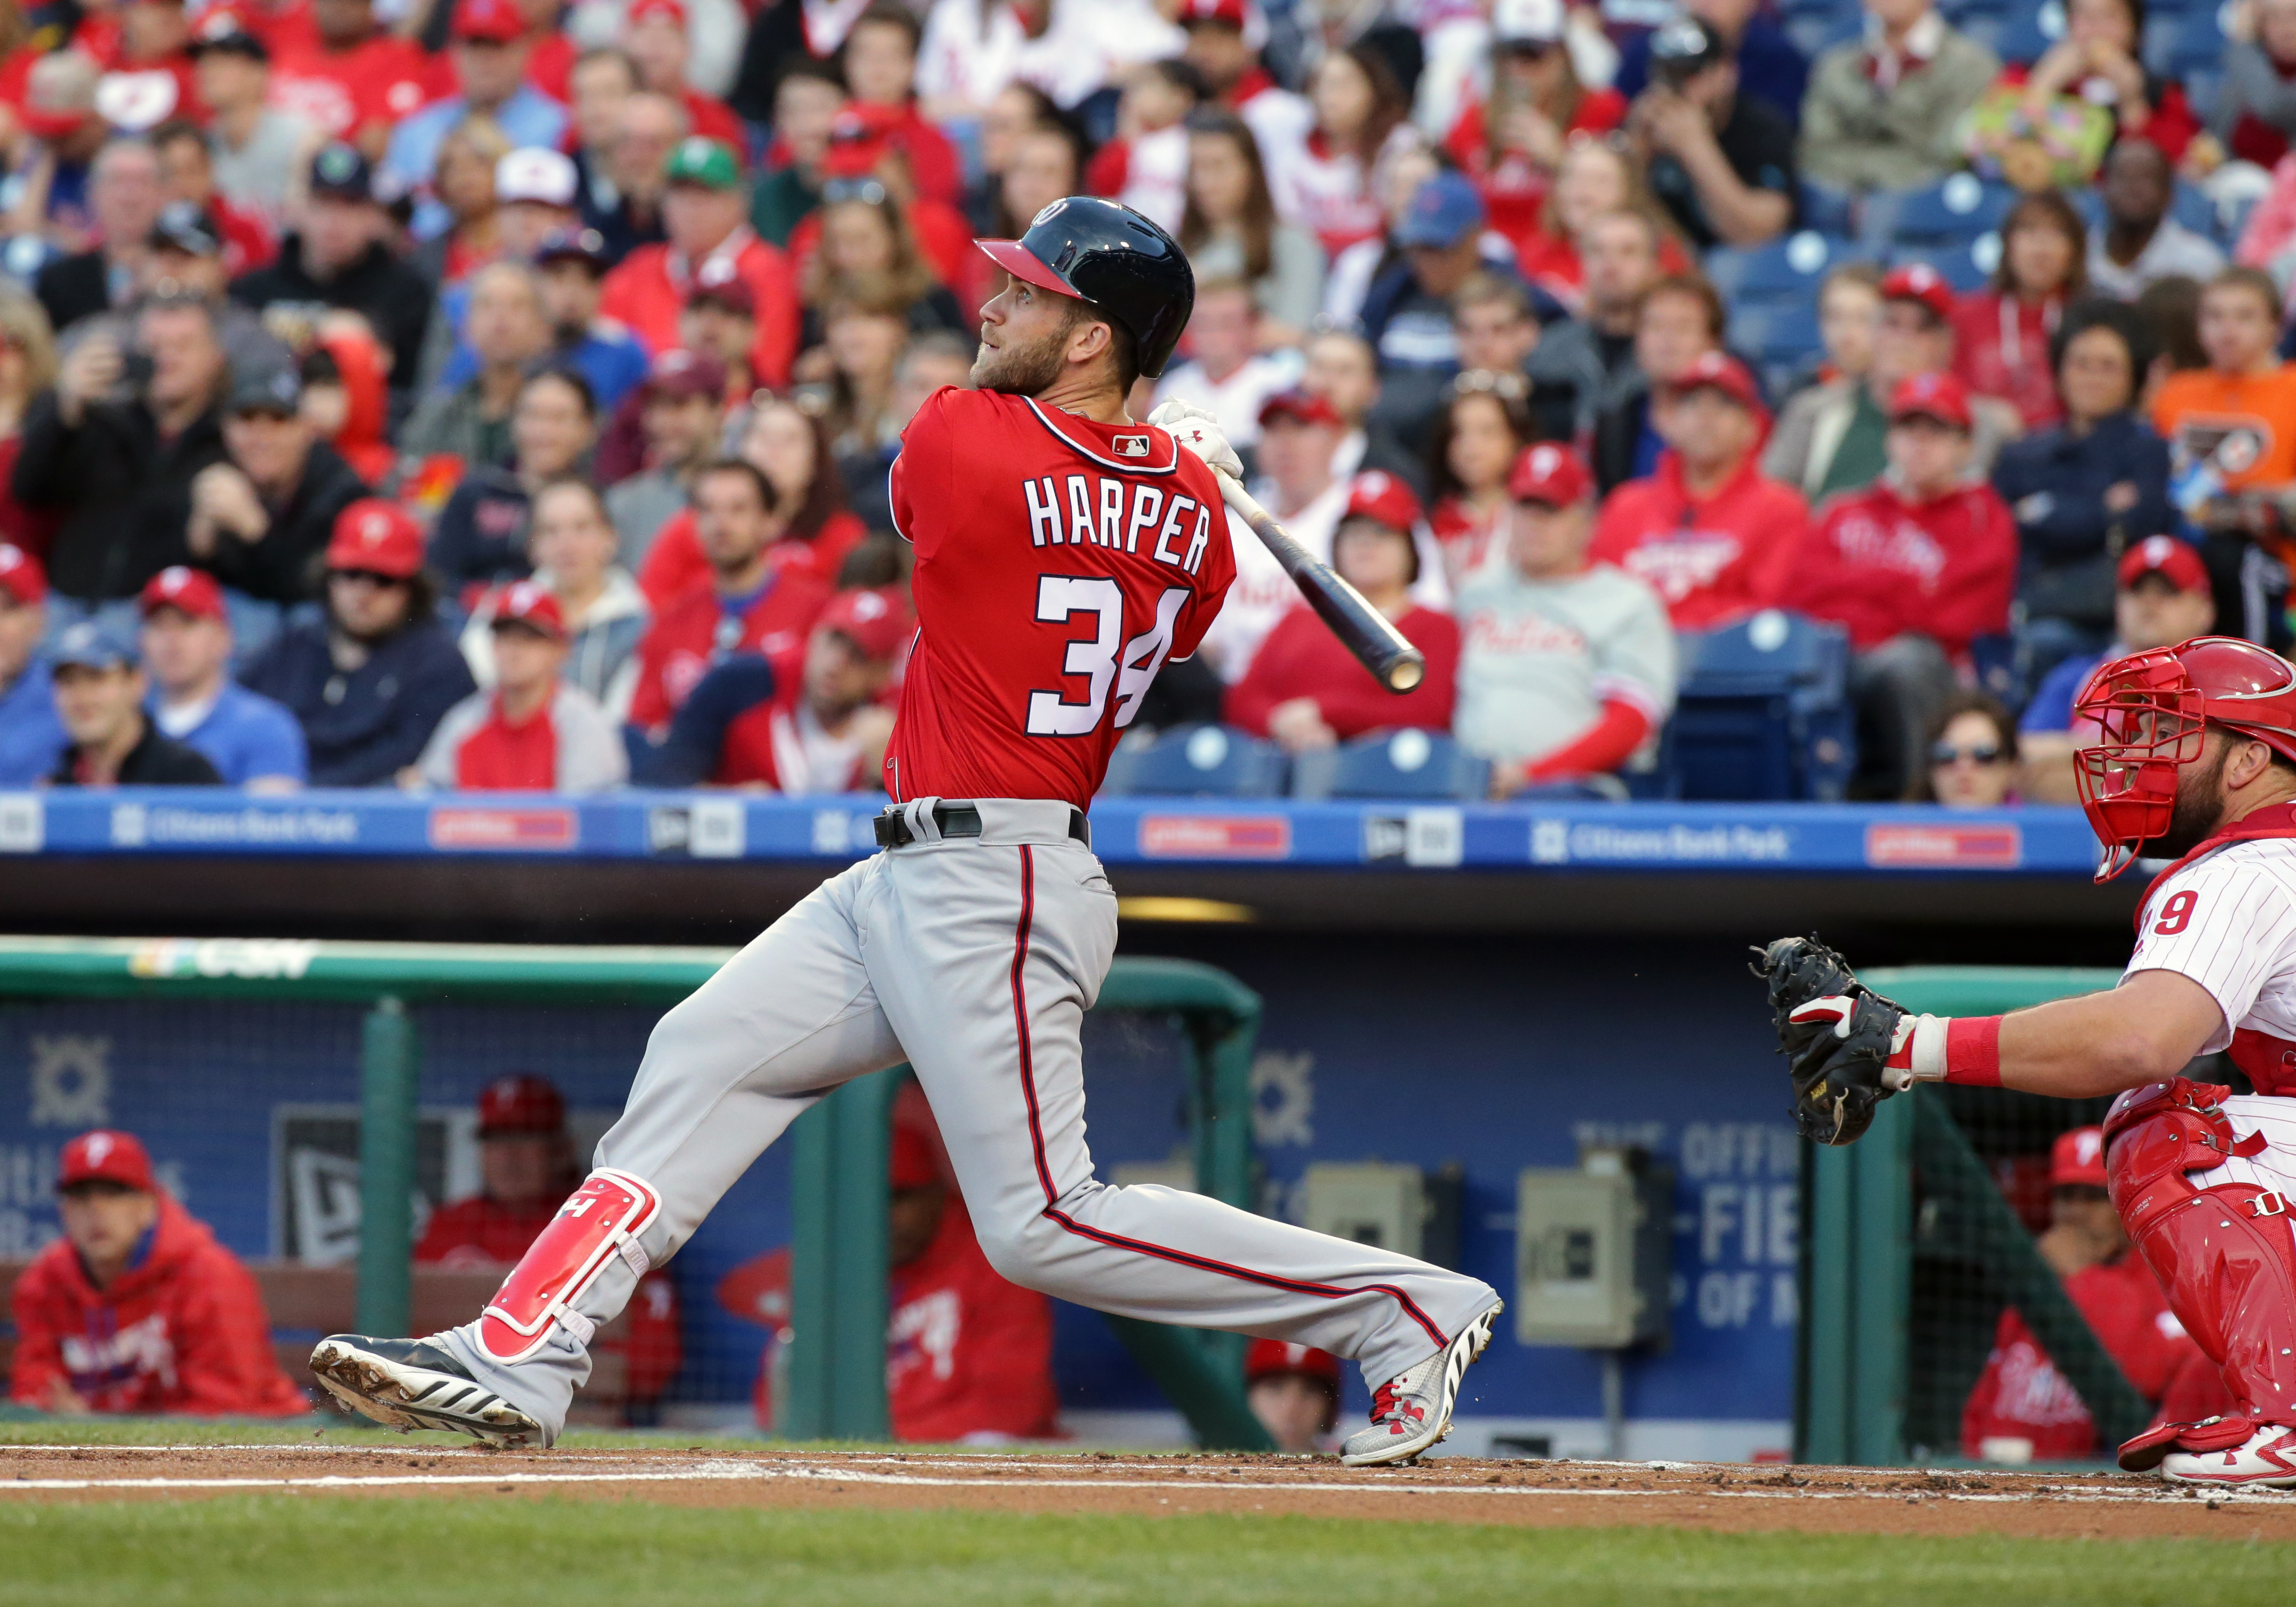 ESPN ranking Bryce Harper as the 58th best player in baseball is